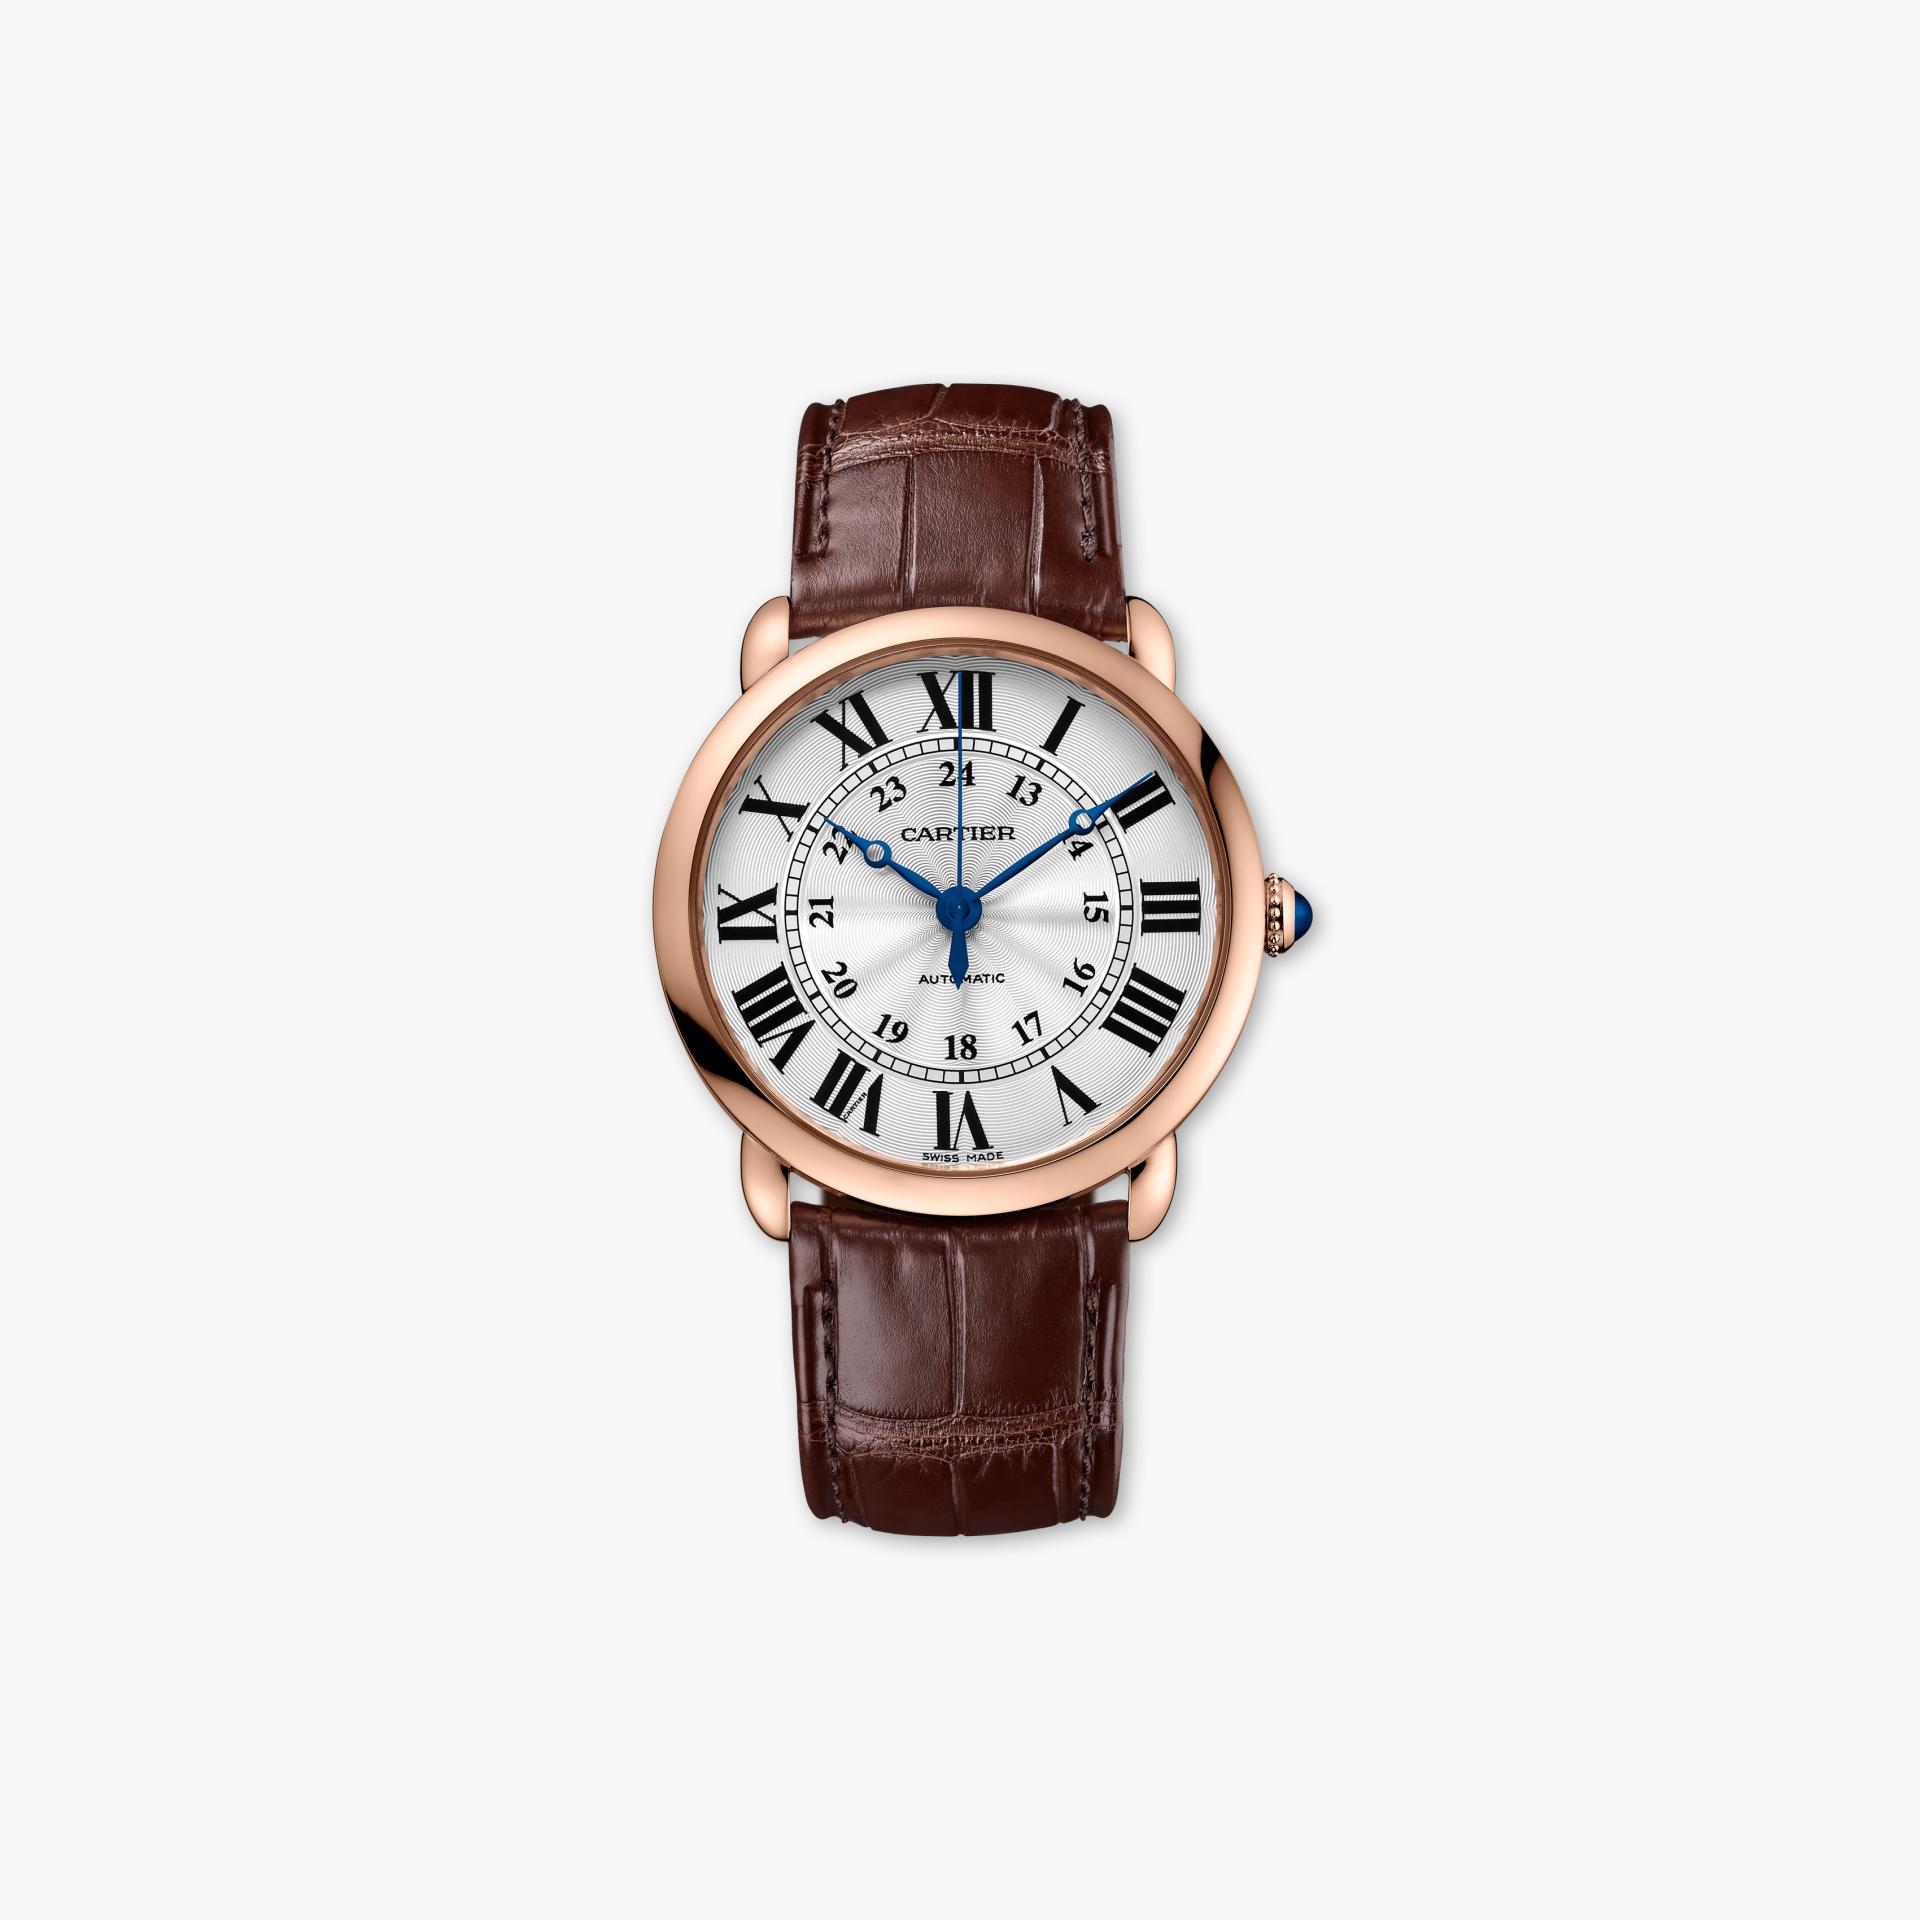 Ronde Louis Cartier made by Cartier